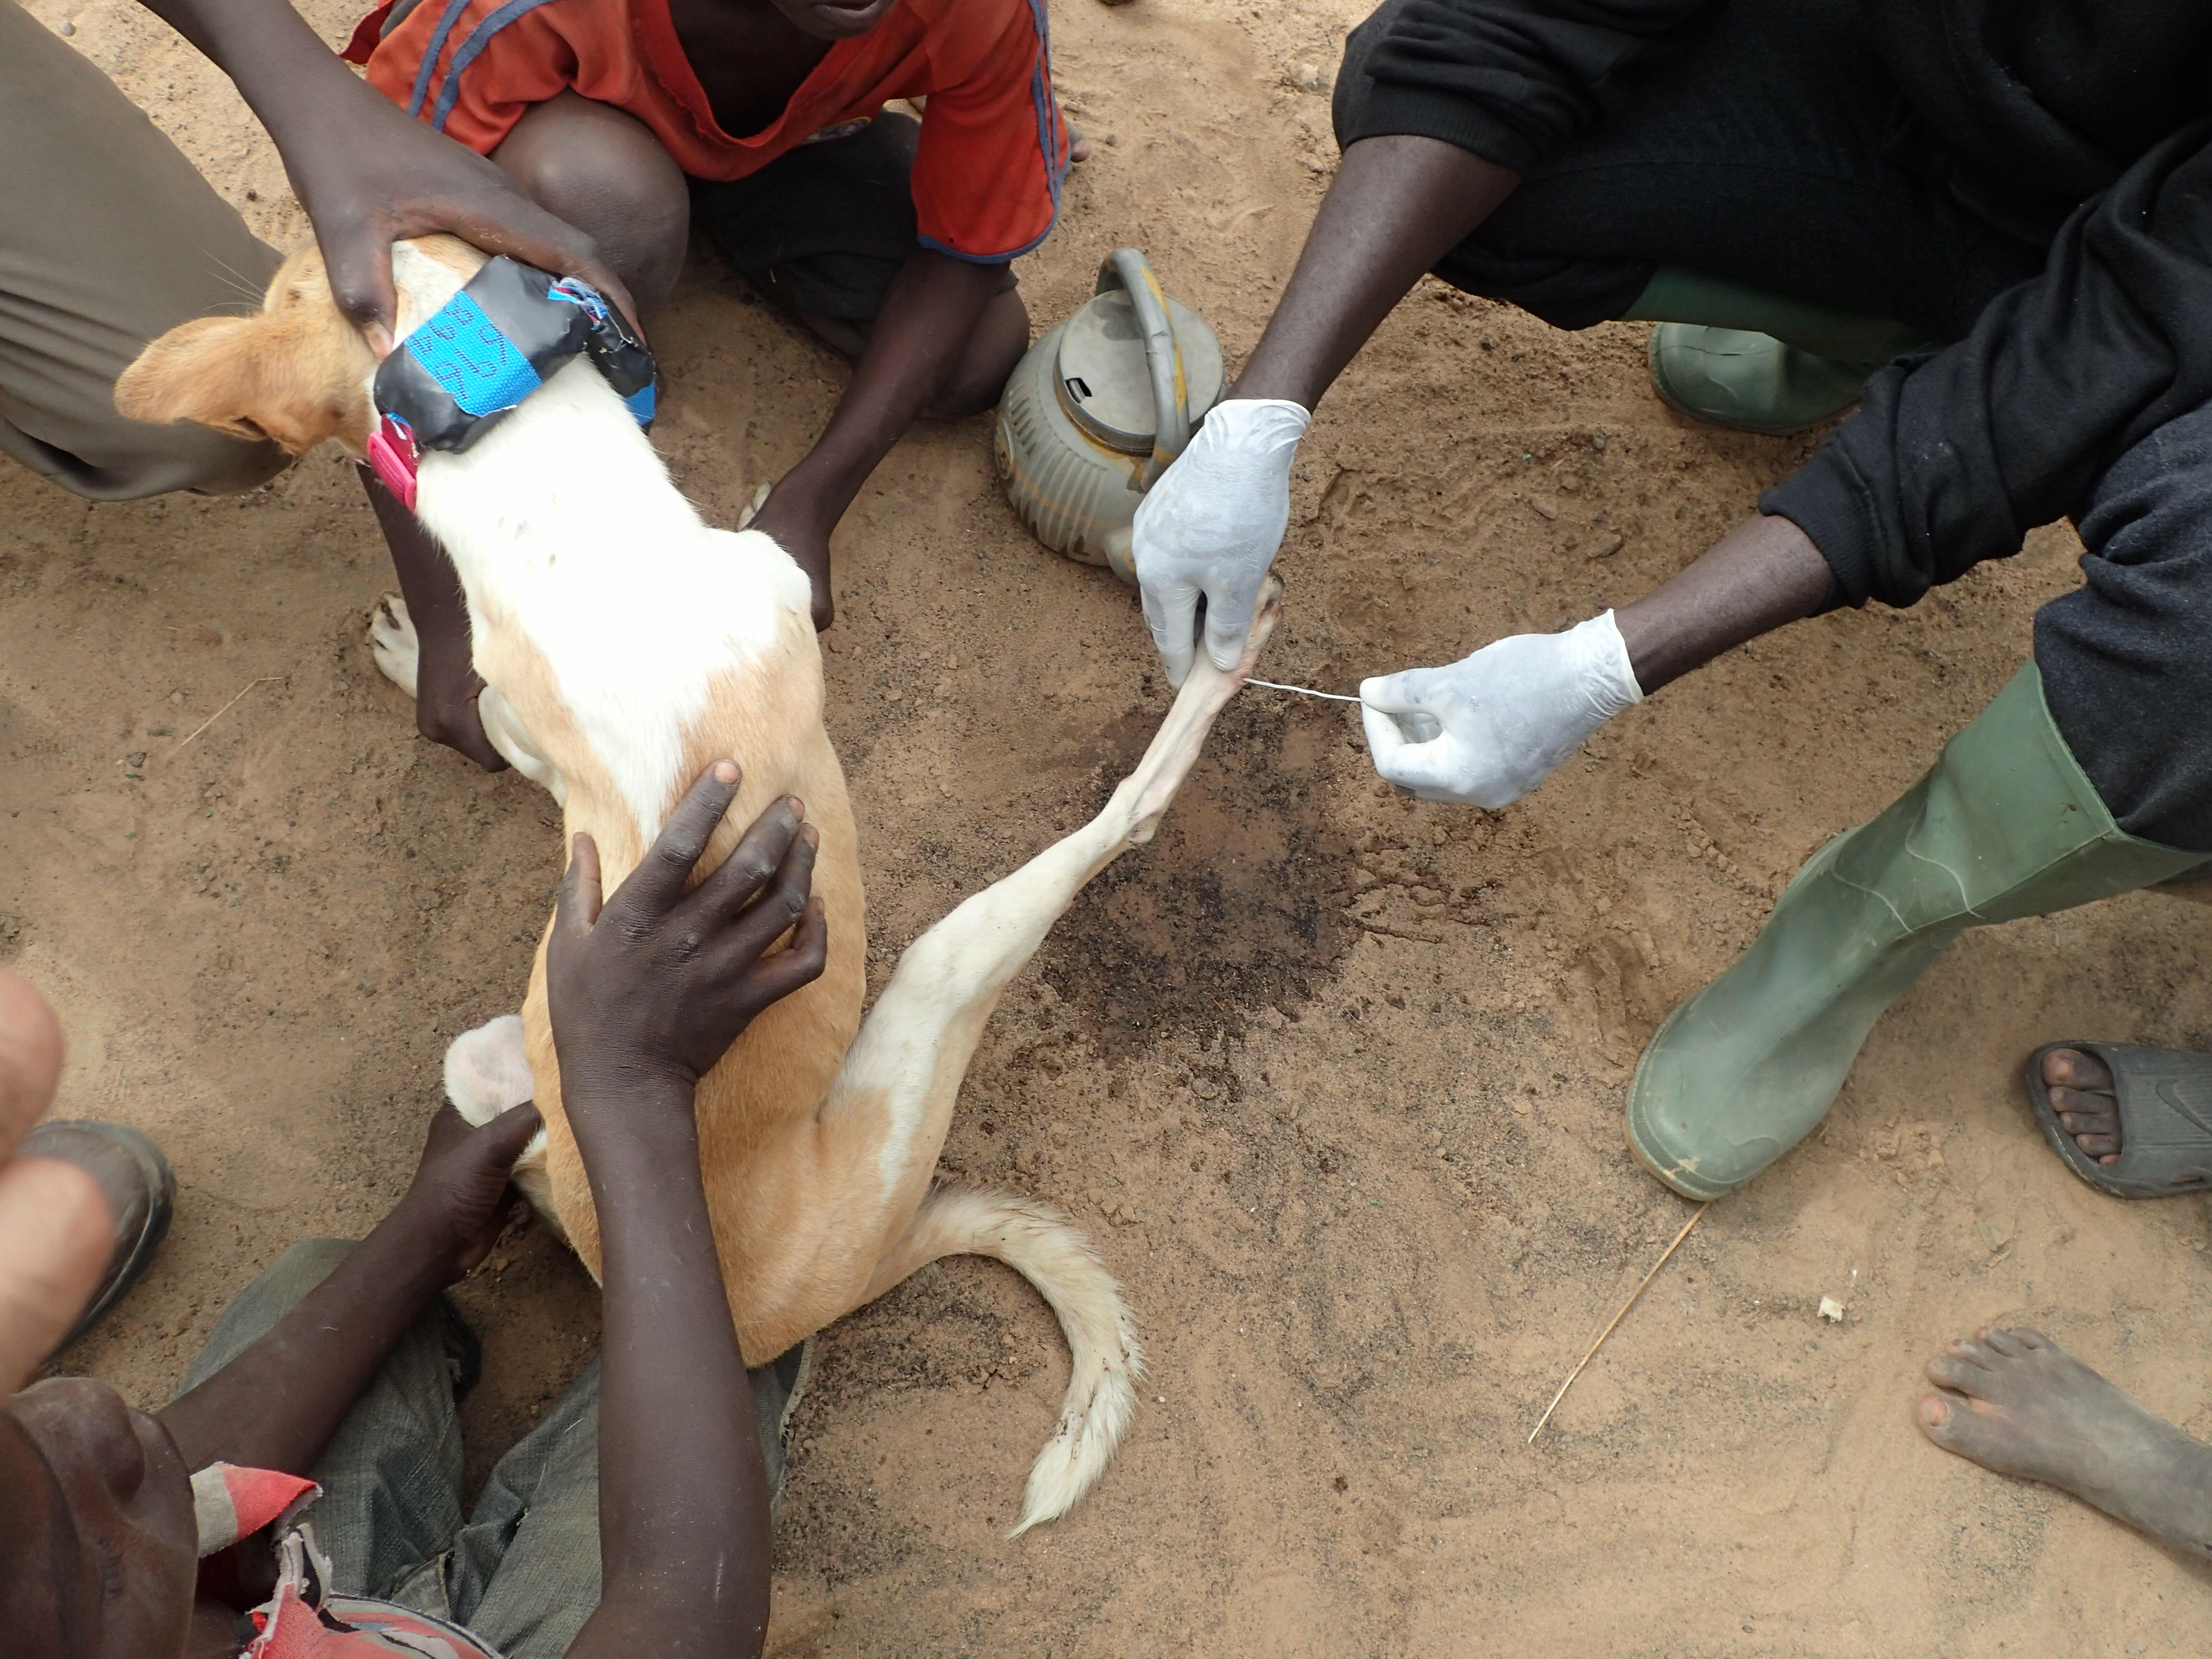 Guinea worm removal from a dog's leg - Photo: Jared Wilson-Aggarwal